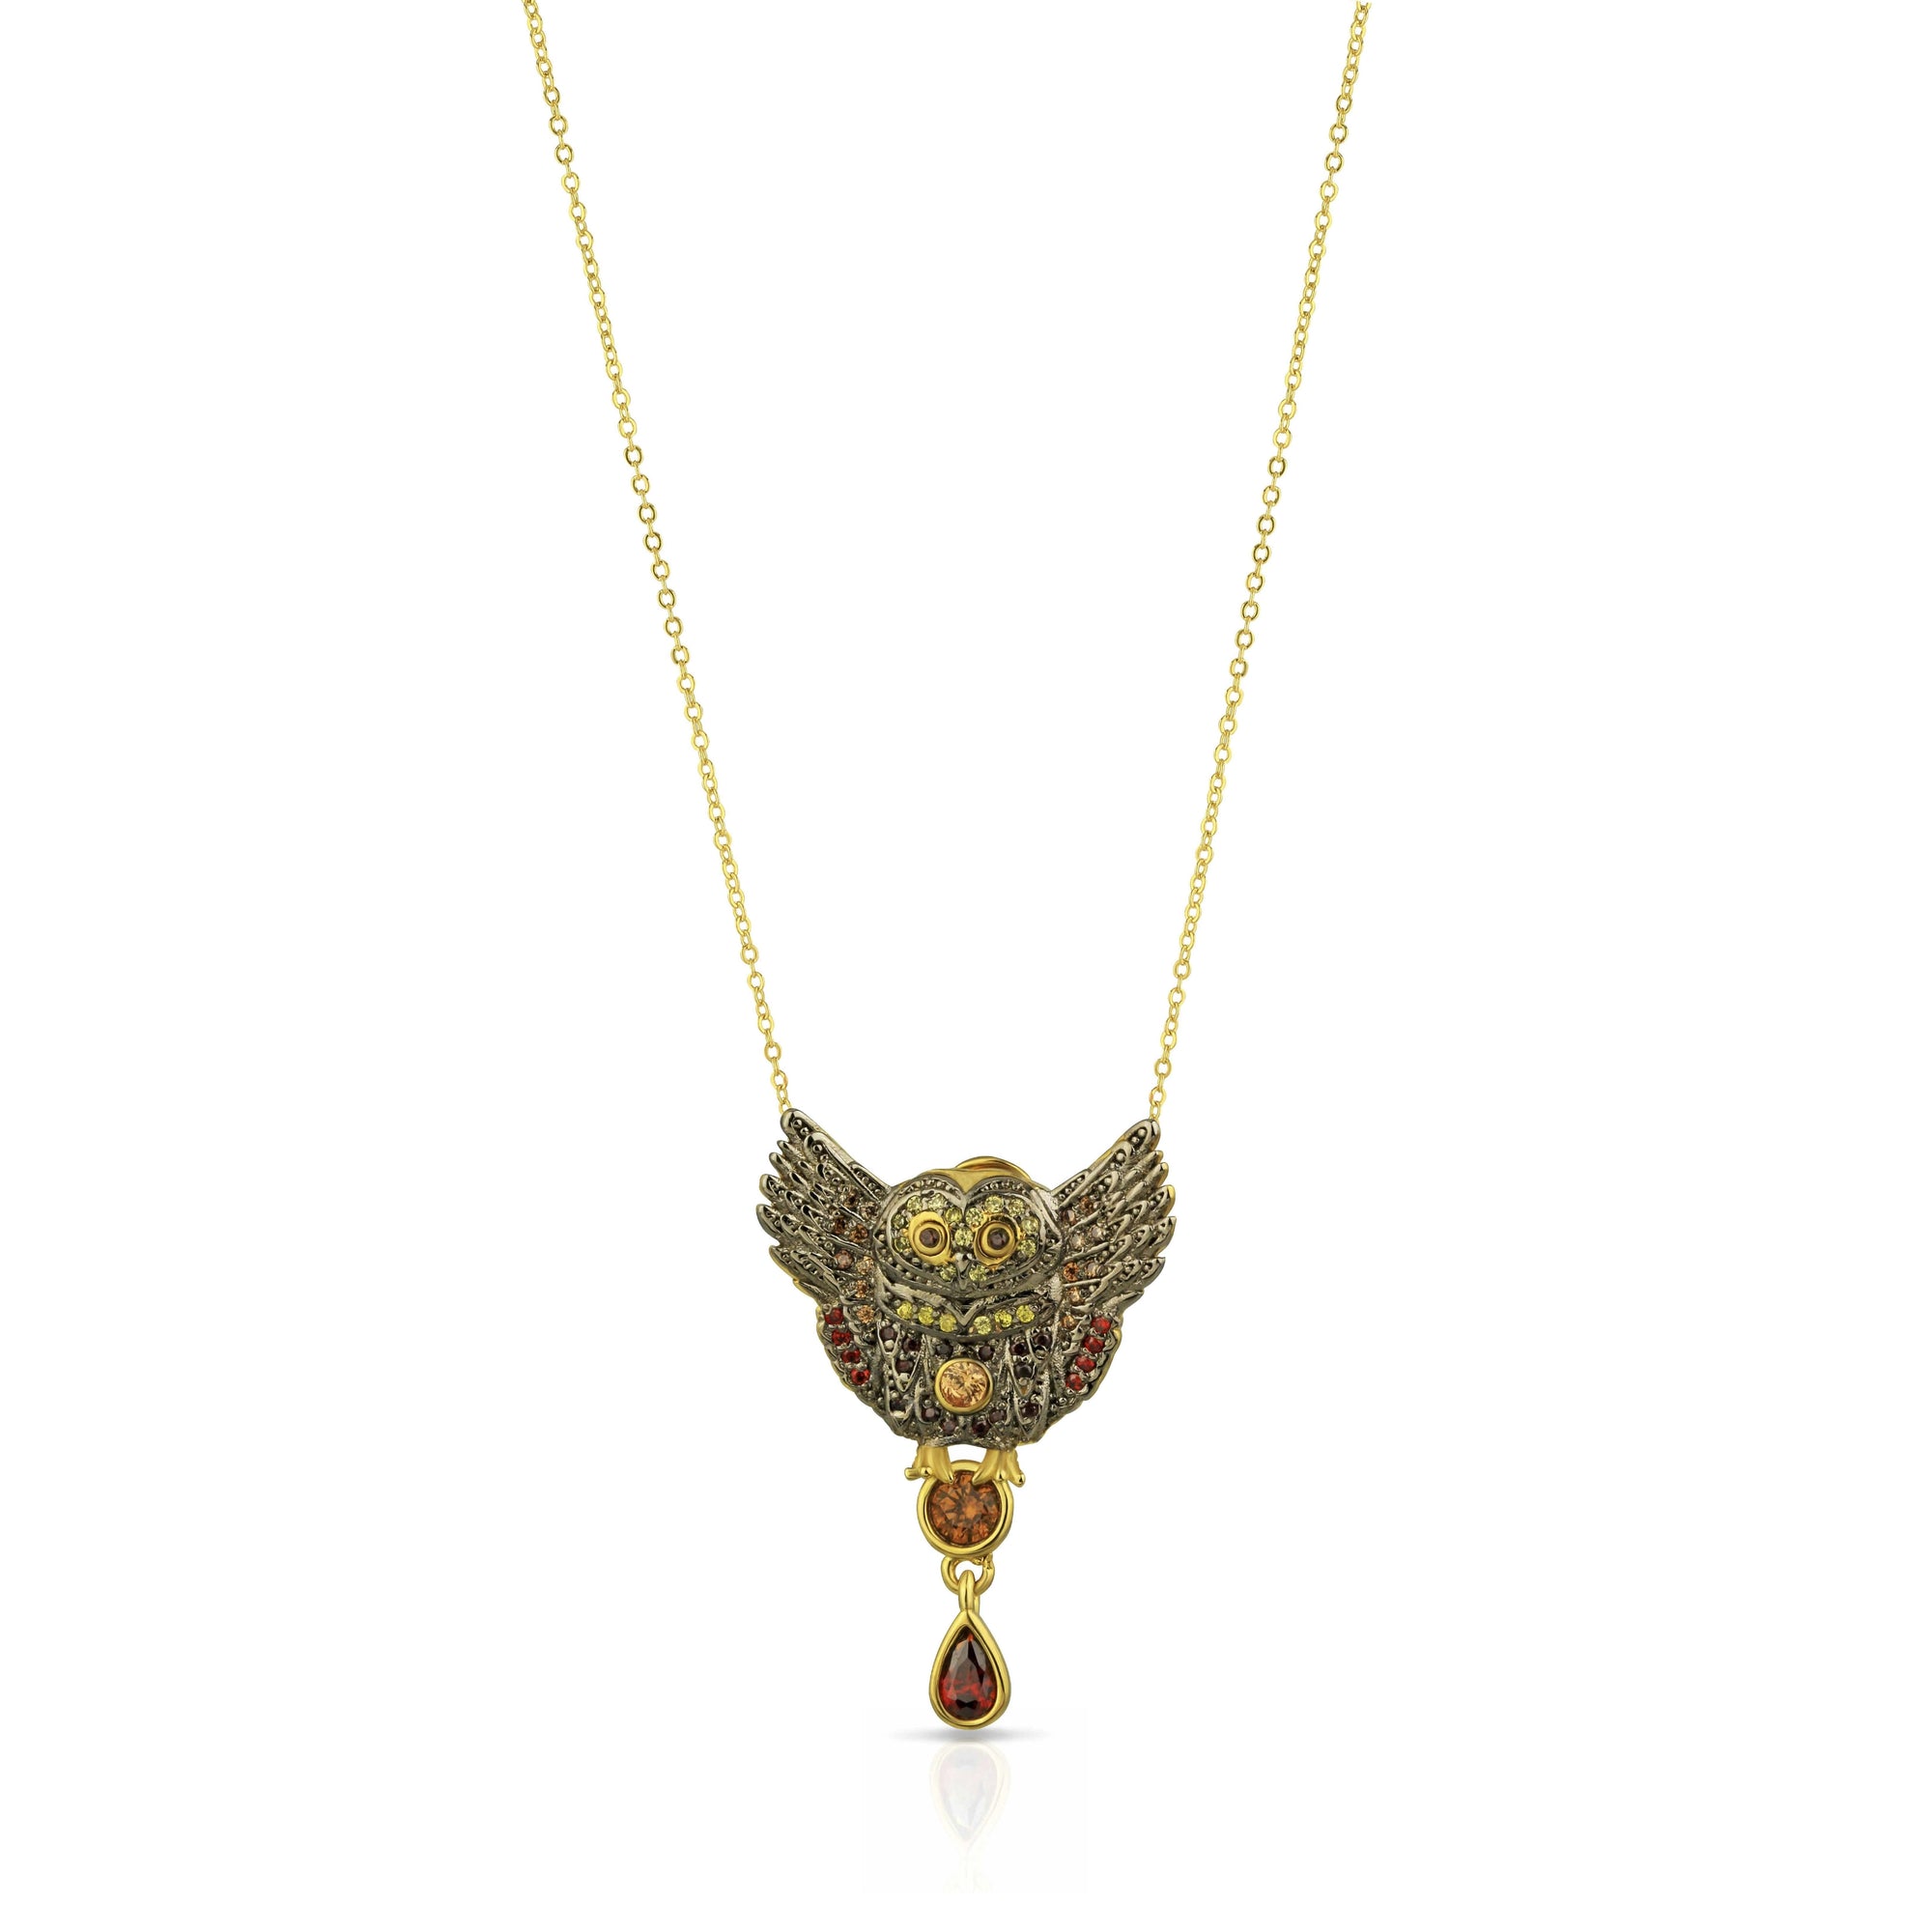 Wise Wings Necklace